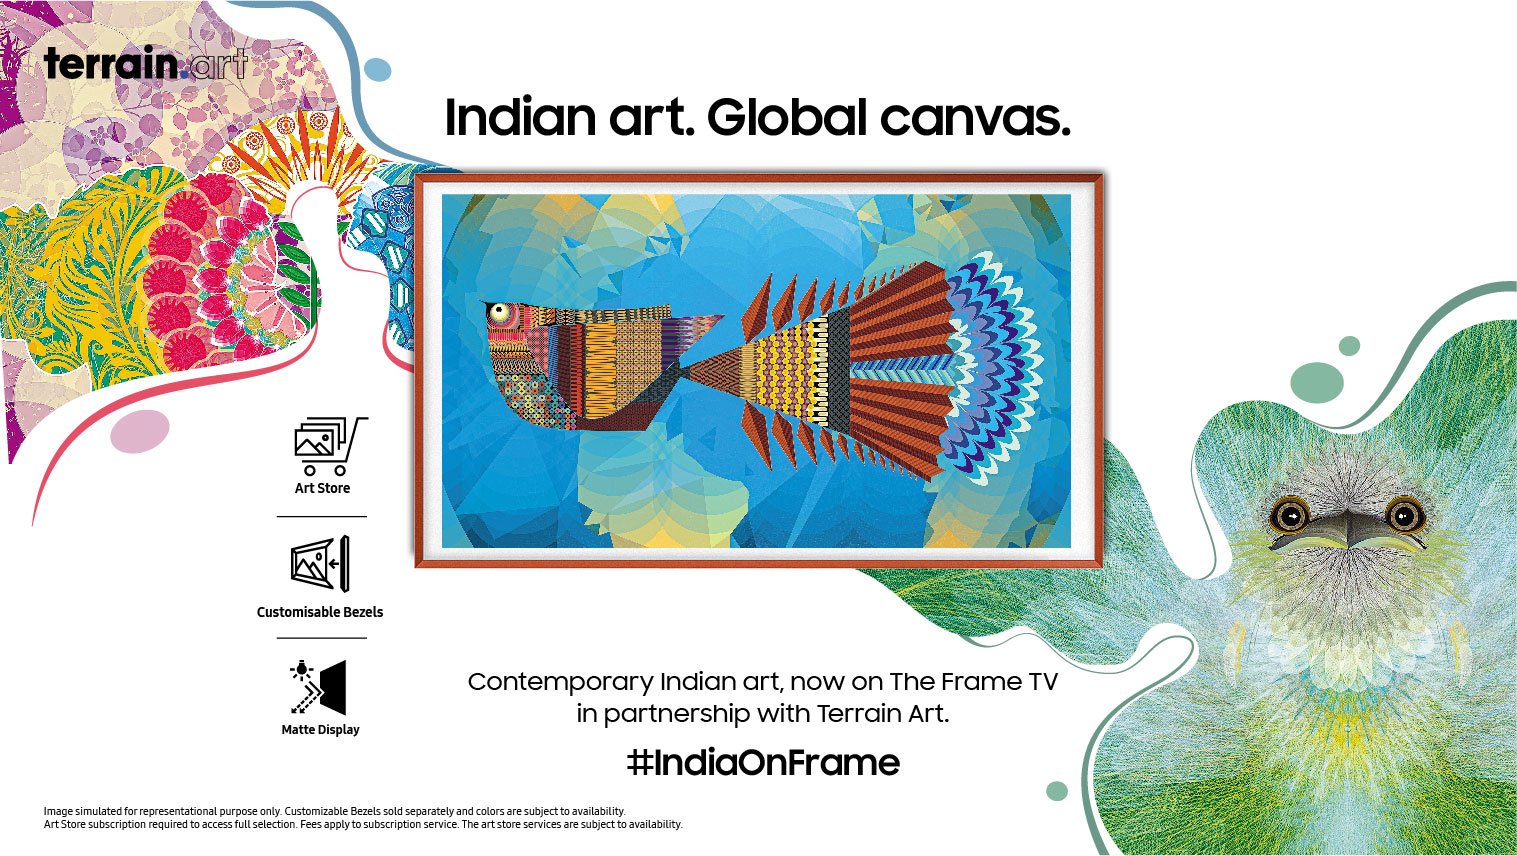 Samsung Brings Contemporary Artwork of Young Indian Artists to Your Home with The Frame TV, Adds More Artworks to Art Store